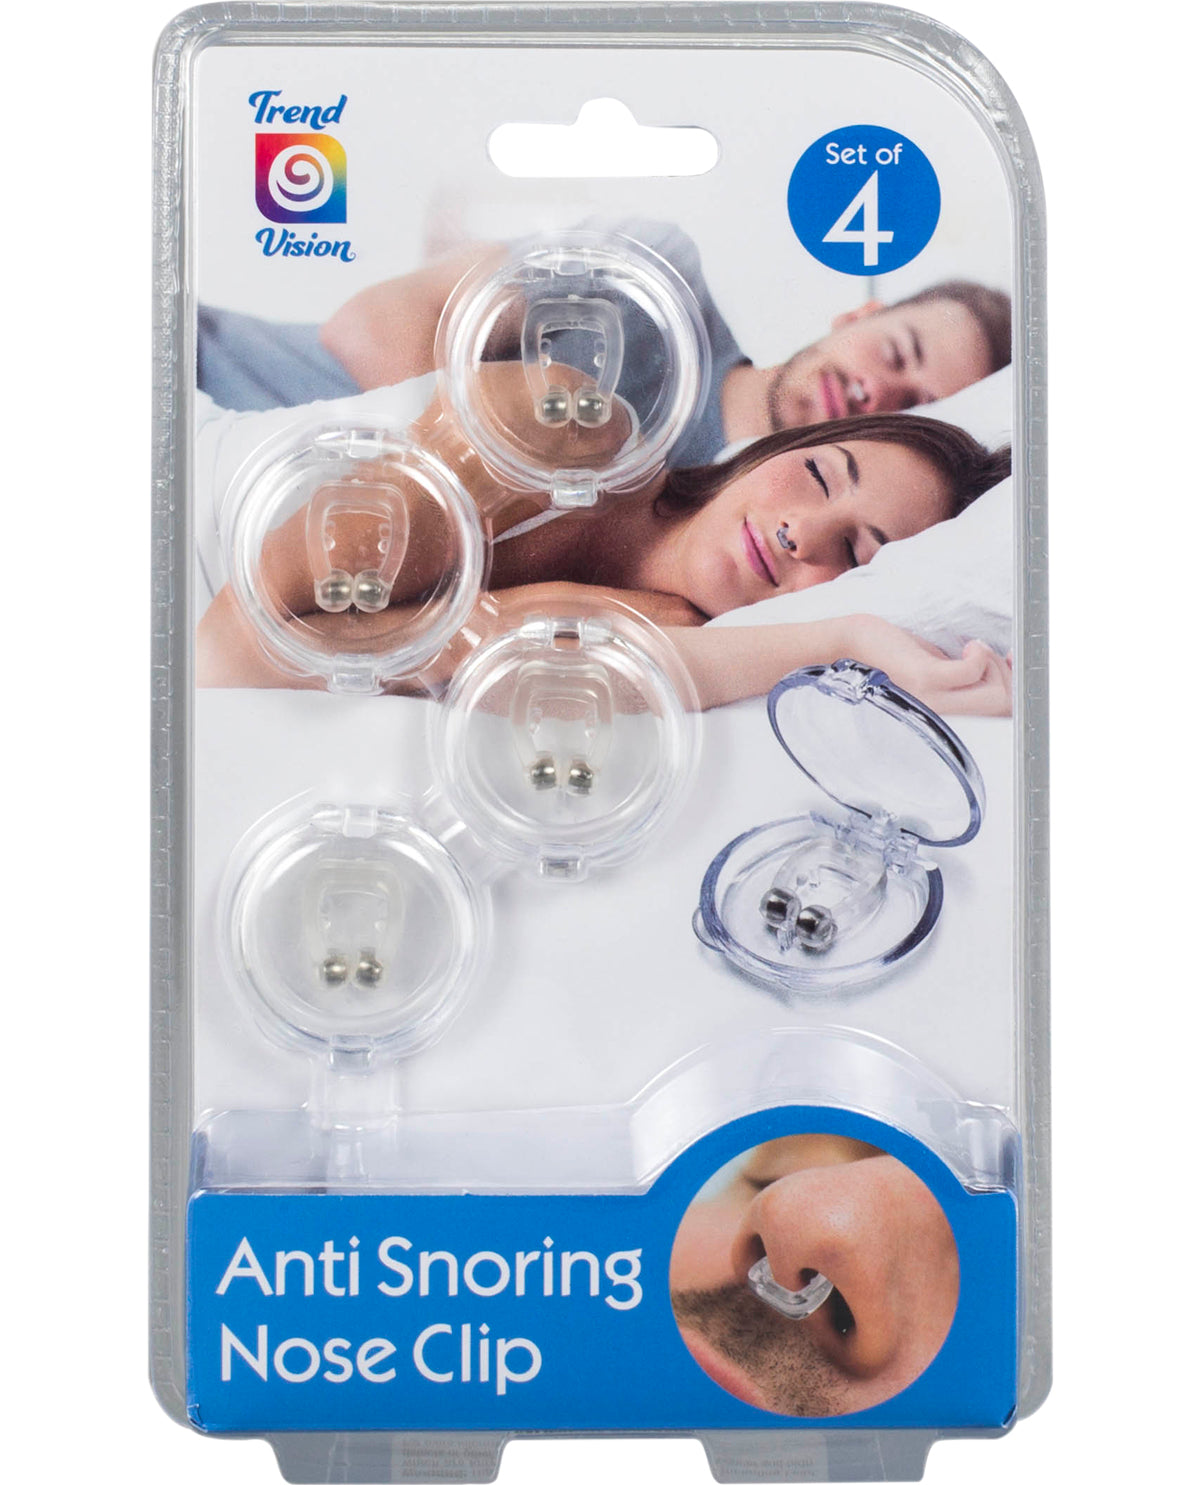 Trend Vision Anti-Snoring Nose Clips - 4 Pack